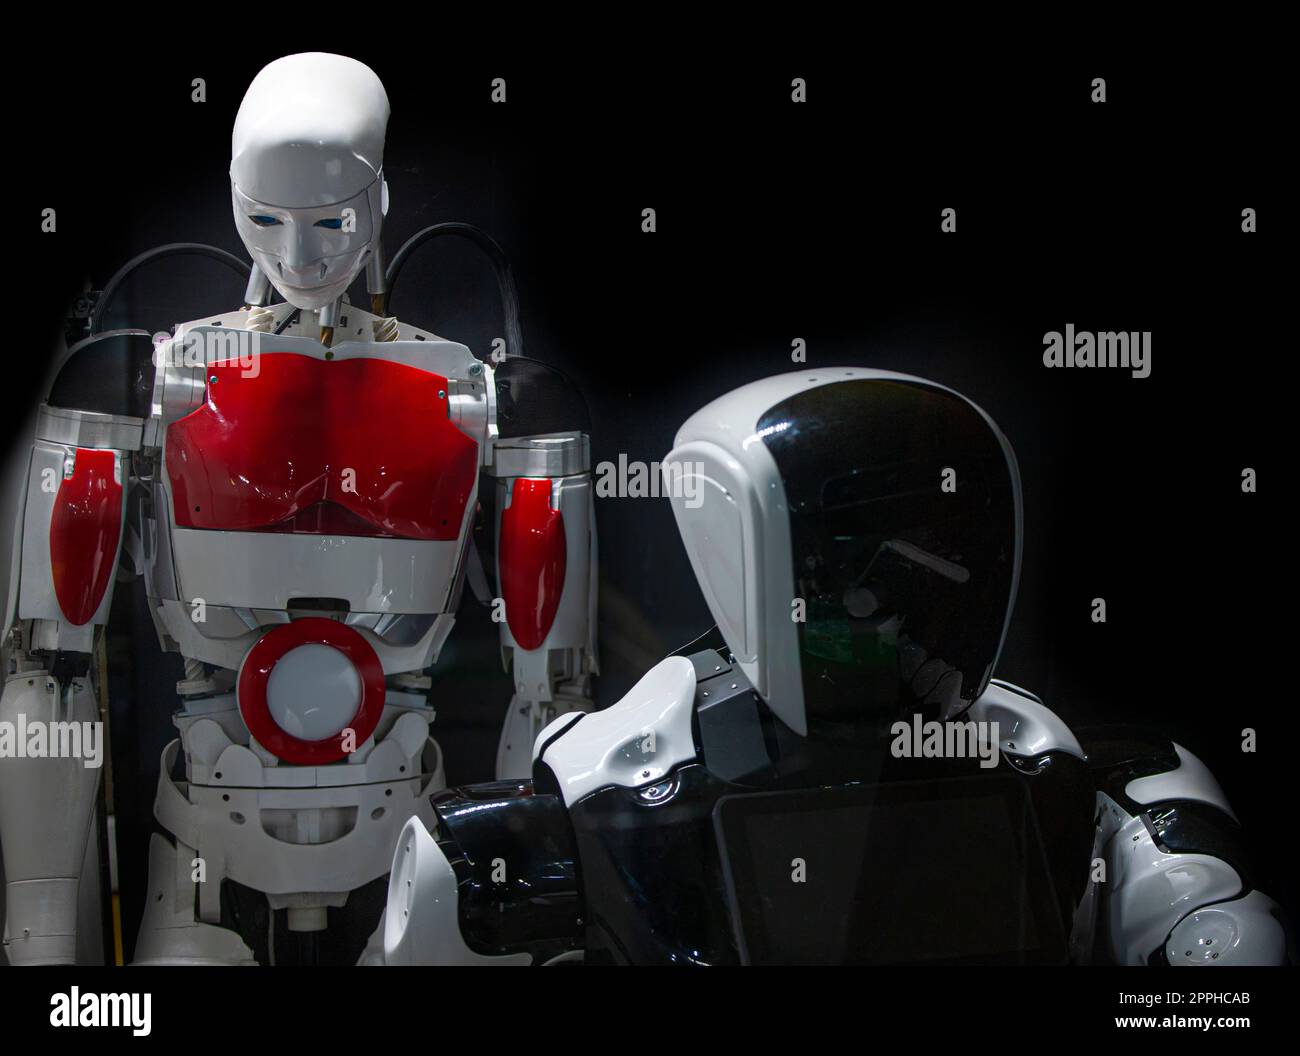 ANDROID ROBOT made of modern materials on a black background Stock Photo